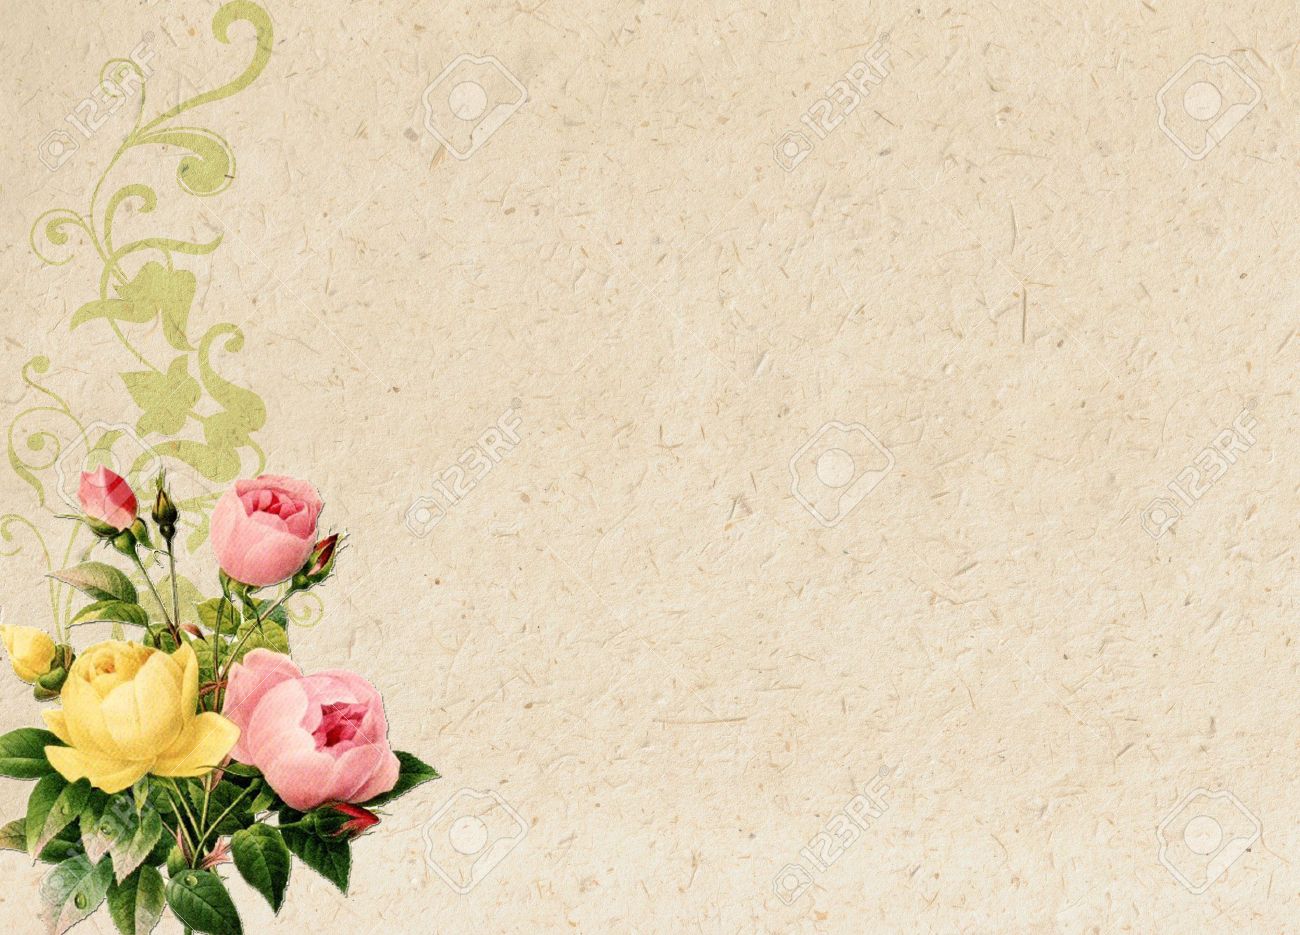 Vintage Romantic Background Google Search Tags